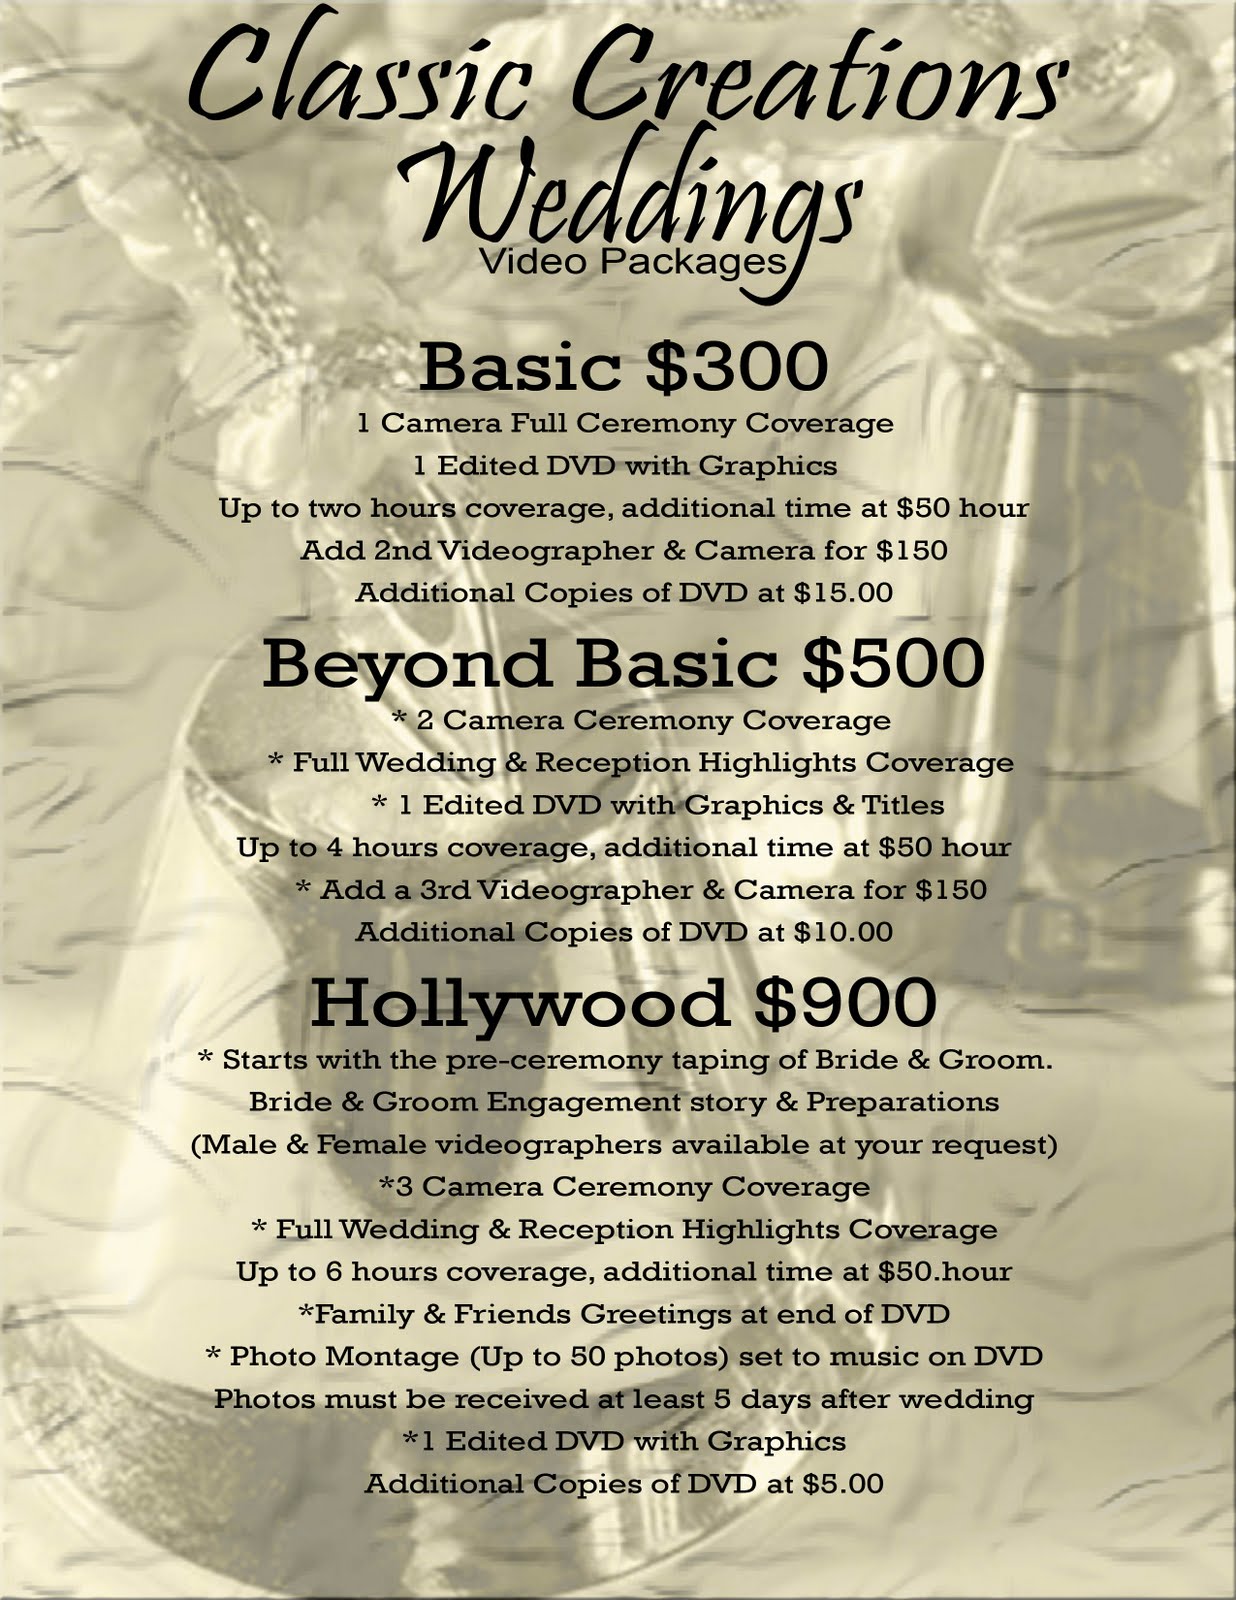 Classic Creations Wedding: Wedding Videography Packages